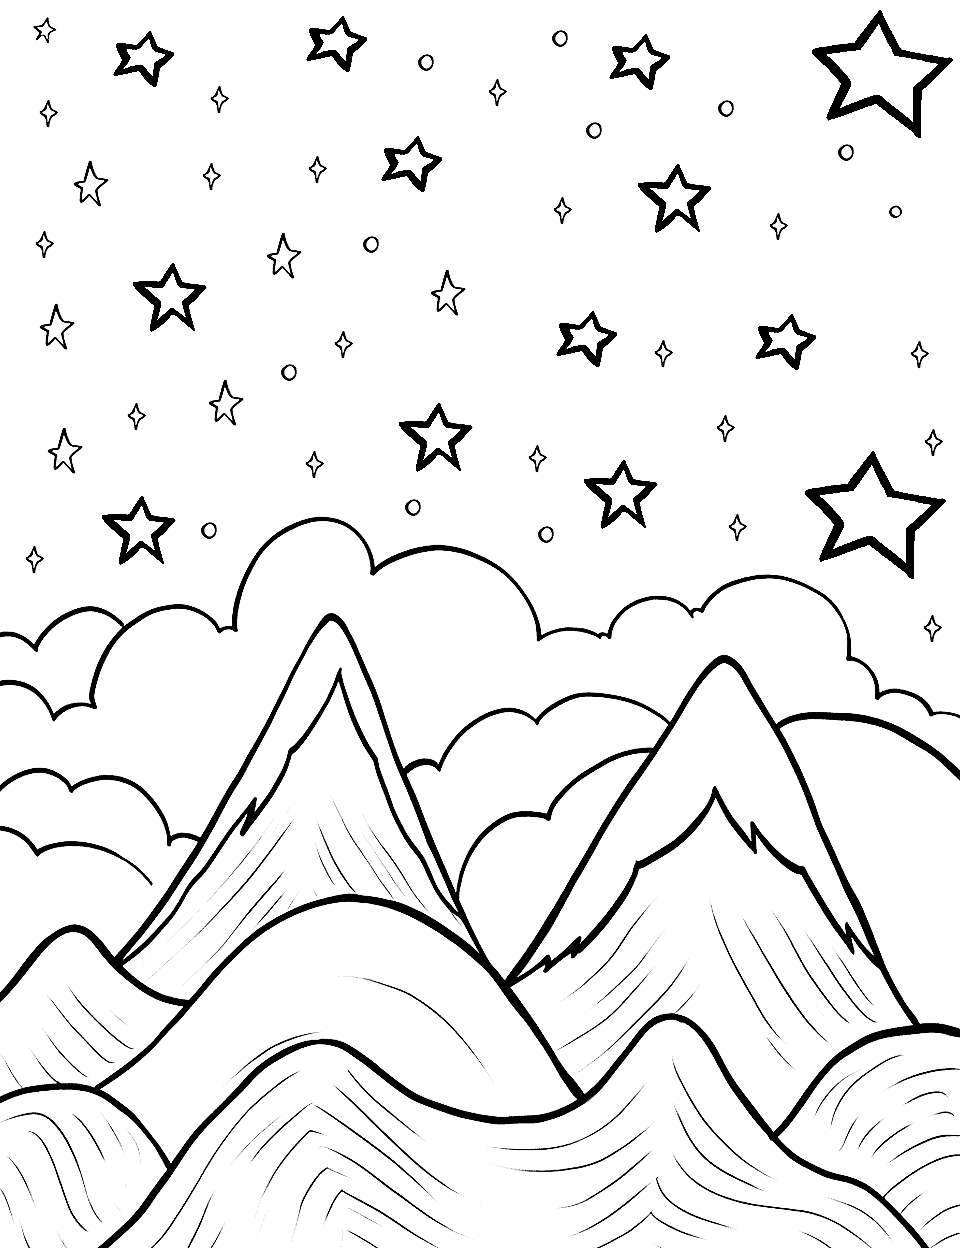 Star-Covered Mountains Star Coloring Page - A mountain range under a starry sky.